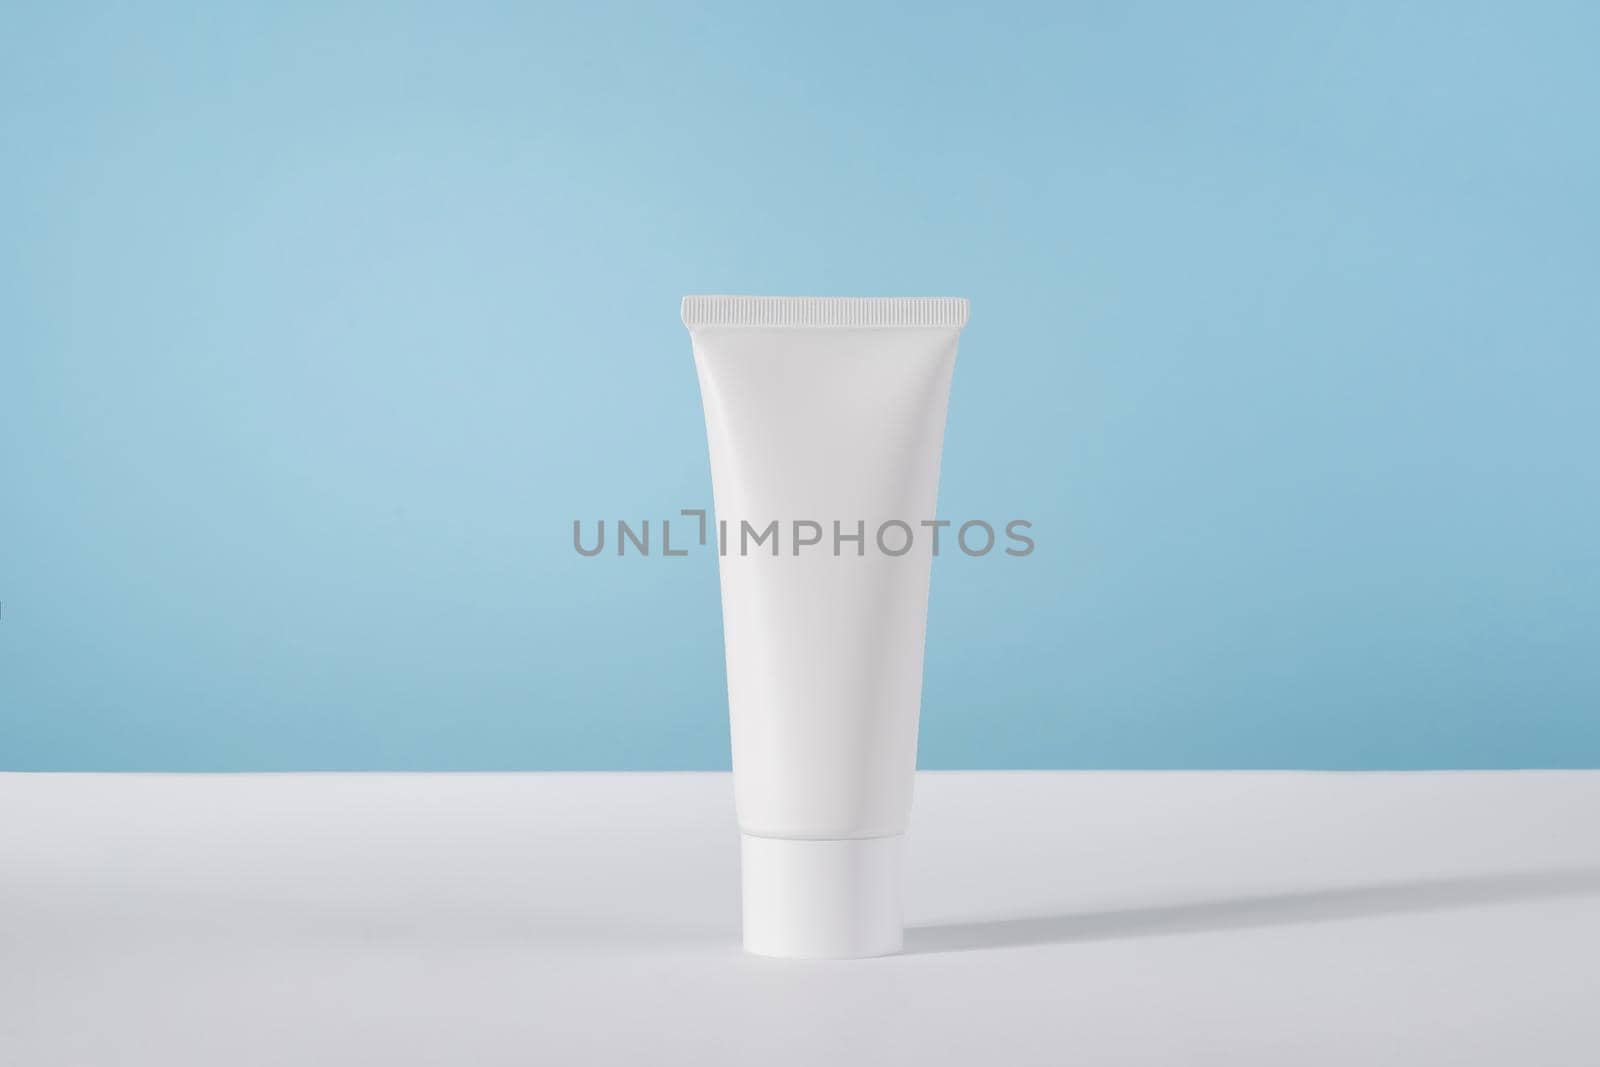 Moisturiser hand cosmetic cream white plastic tube mockup on blue background front view. Blank body and health care beauty product packaging by photolime